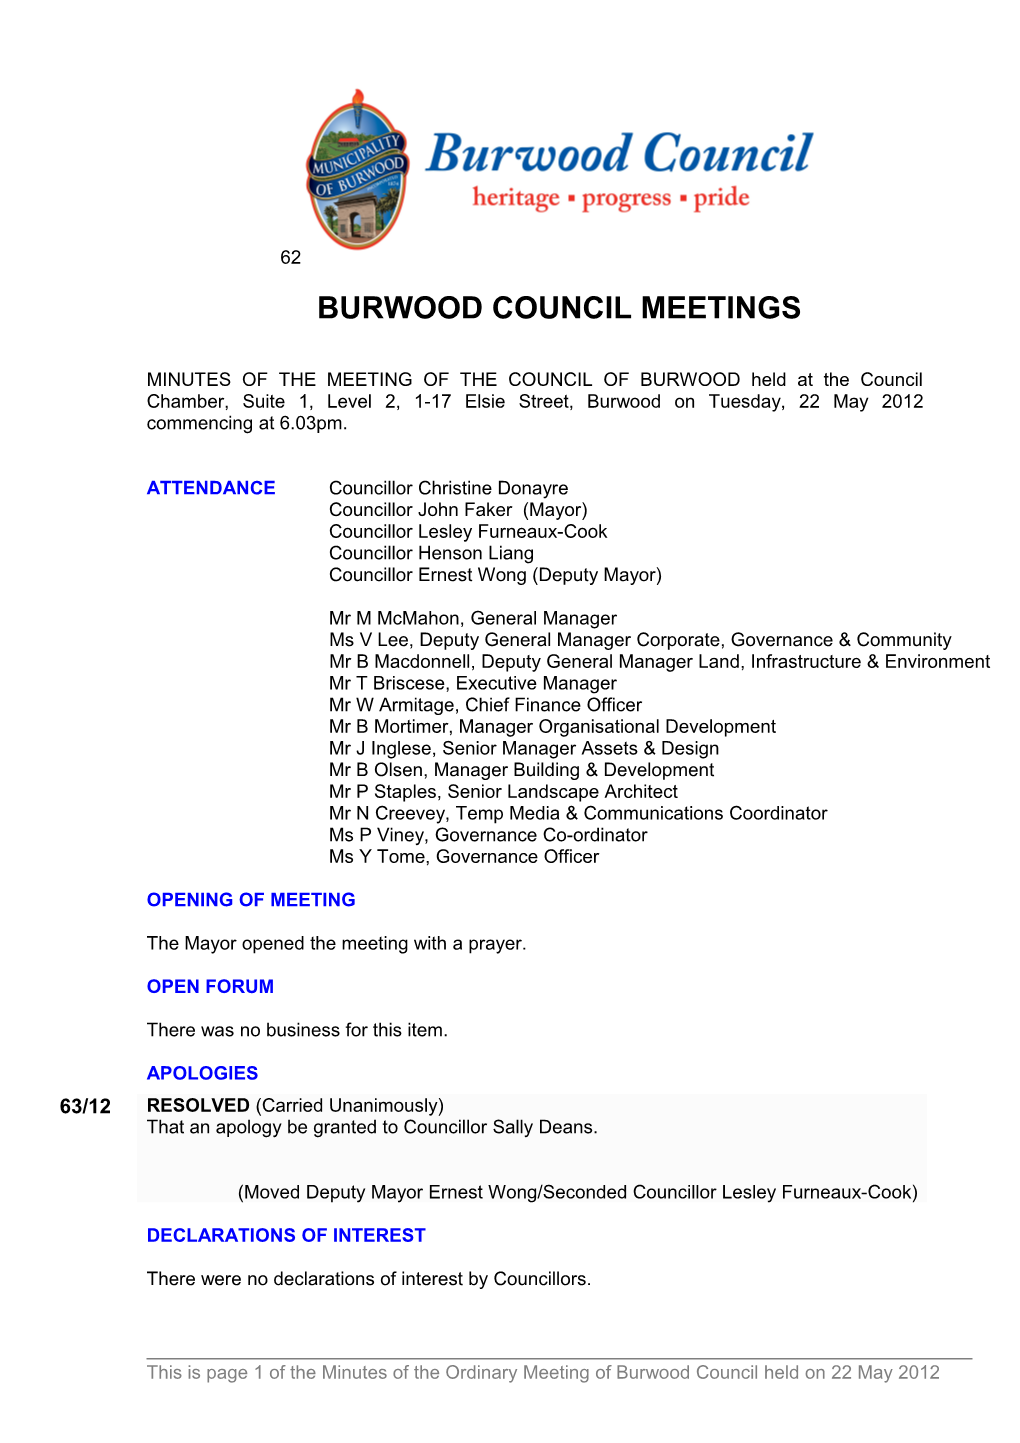 Pro-Forma Minutes of Burwood Council Meetings - 22 May 2012